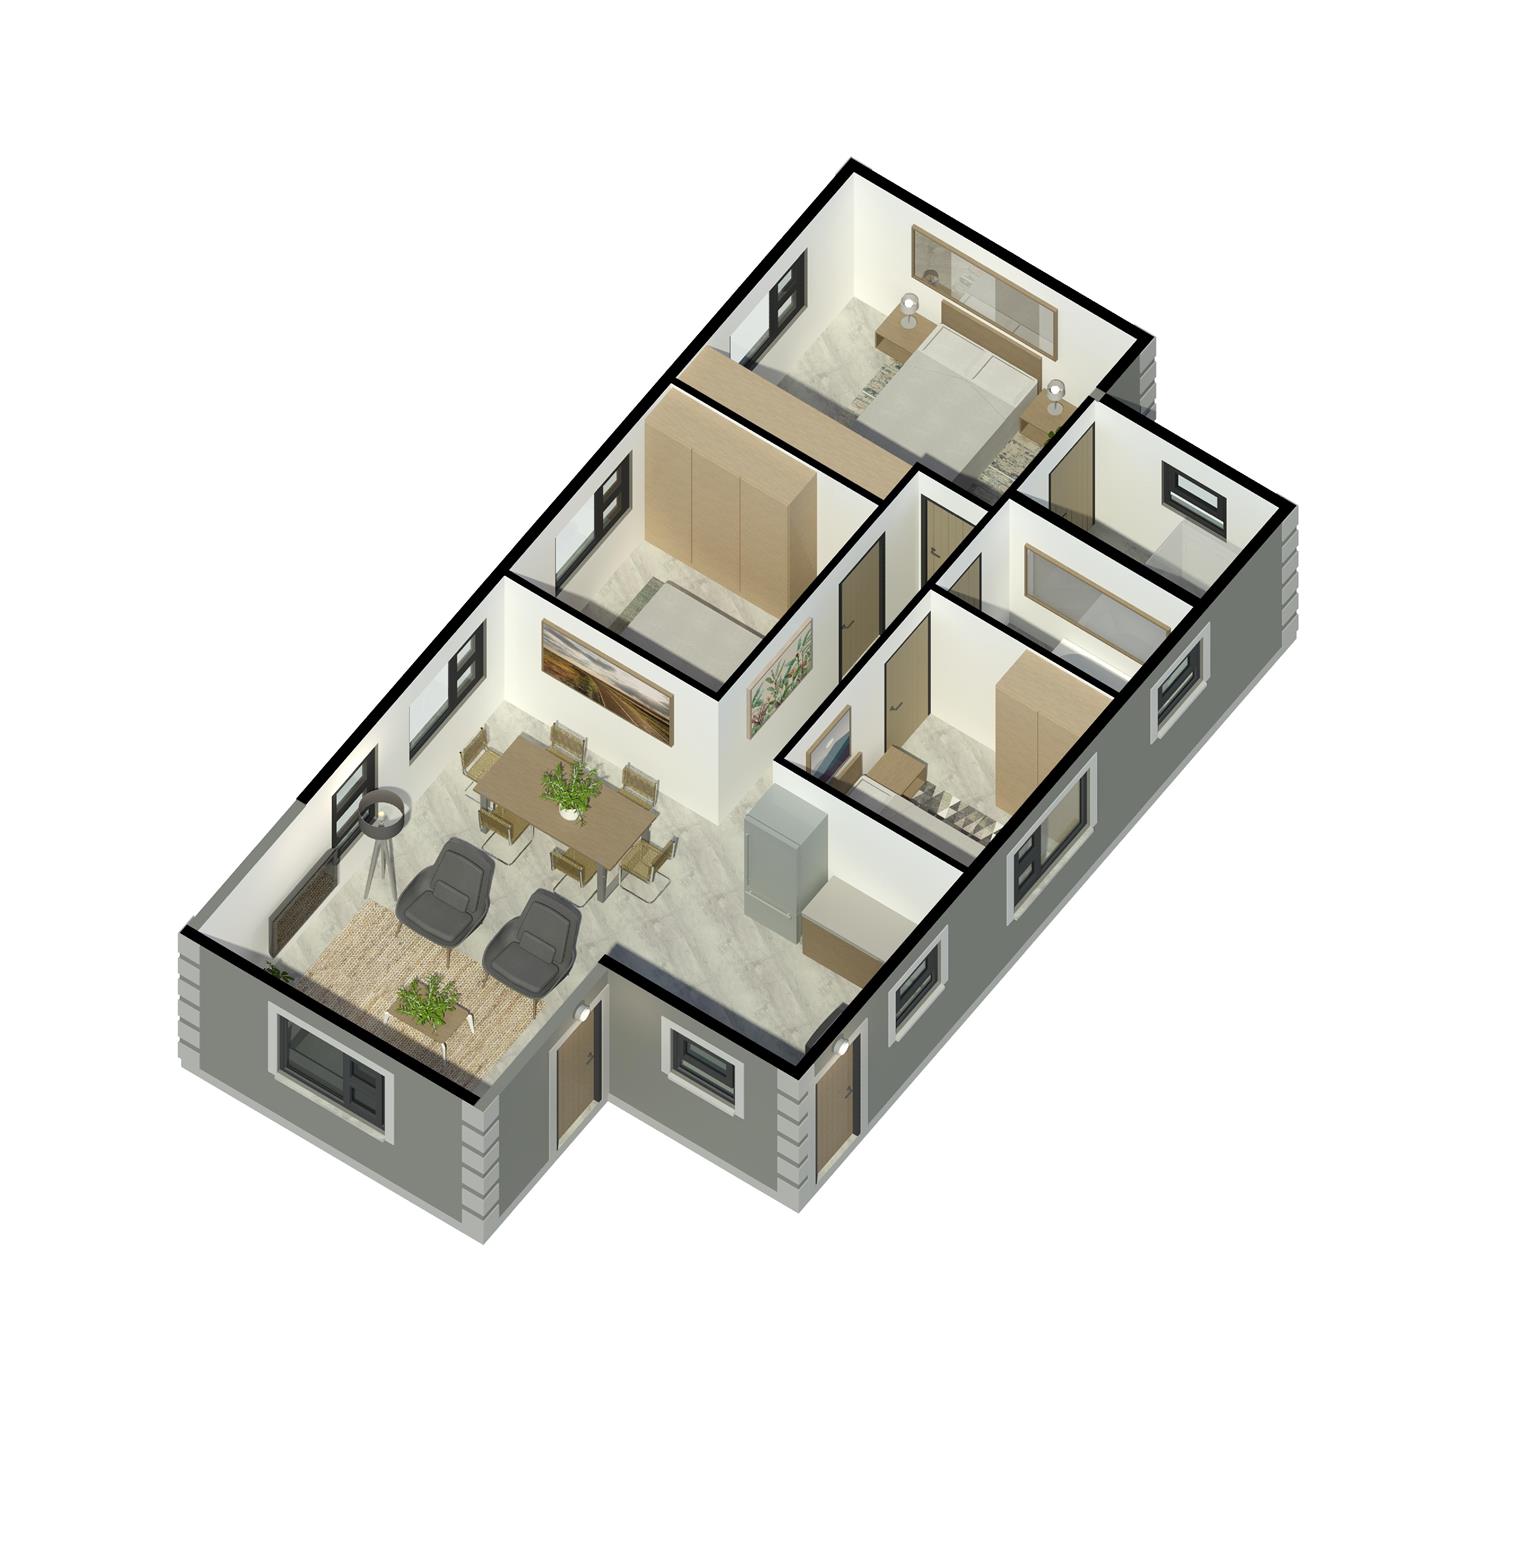 Toekomsrus Ext 5 Phase 2 - NOW SELLING!